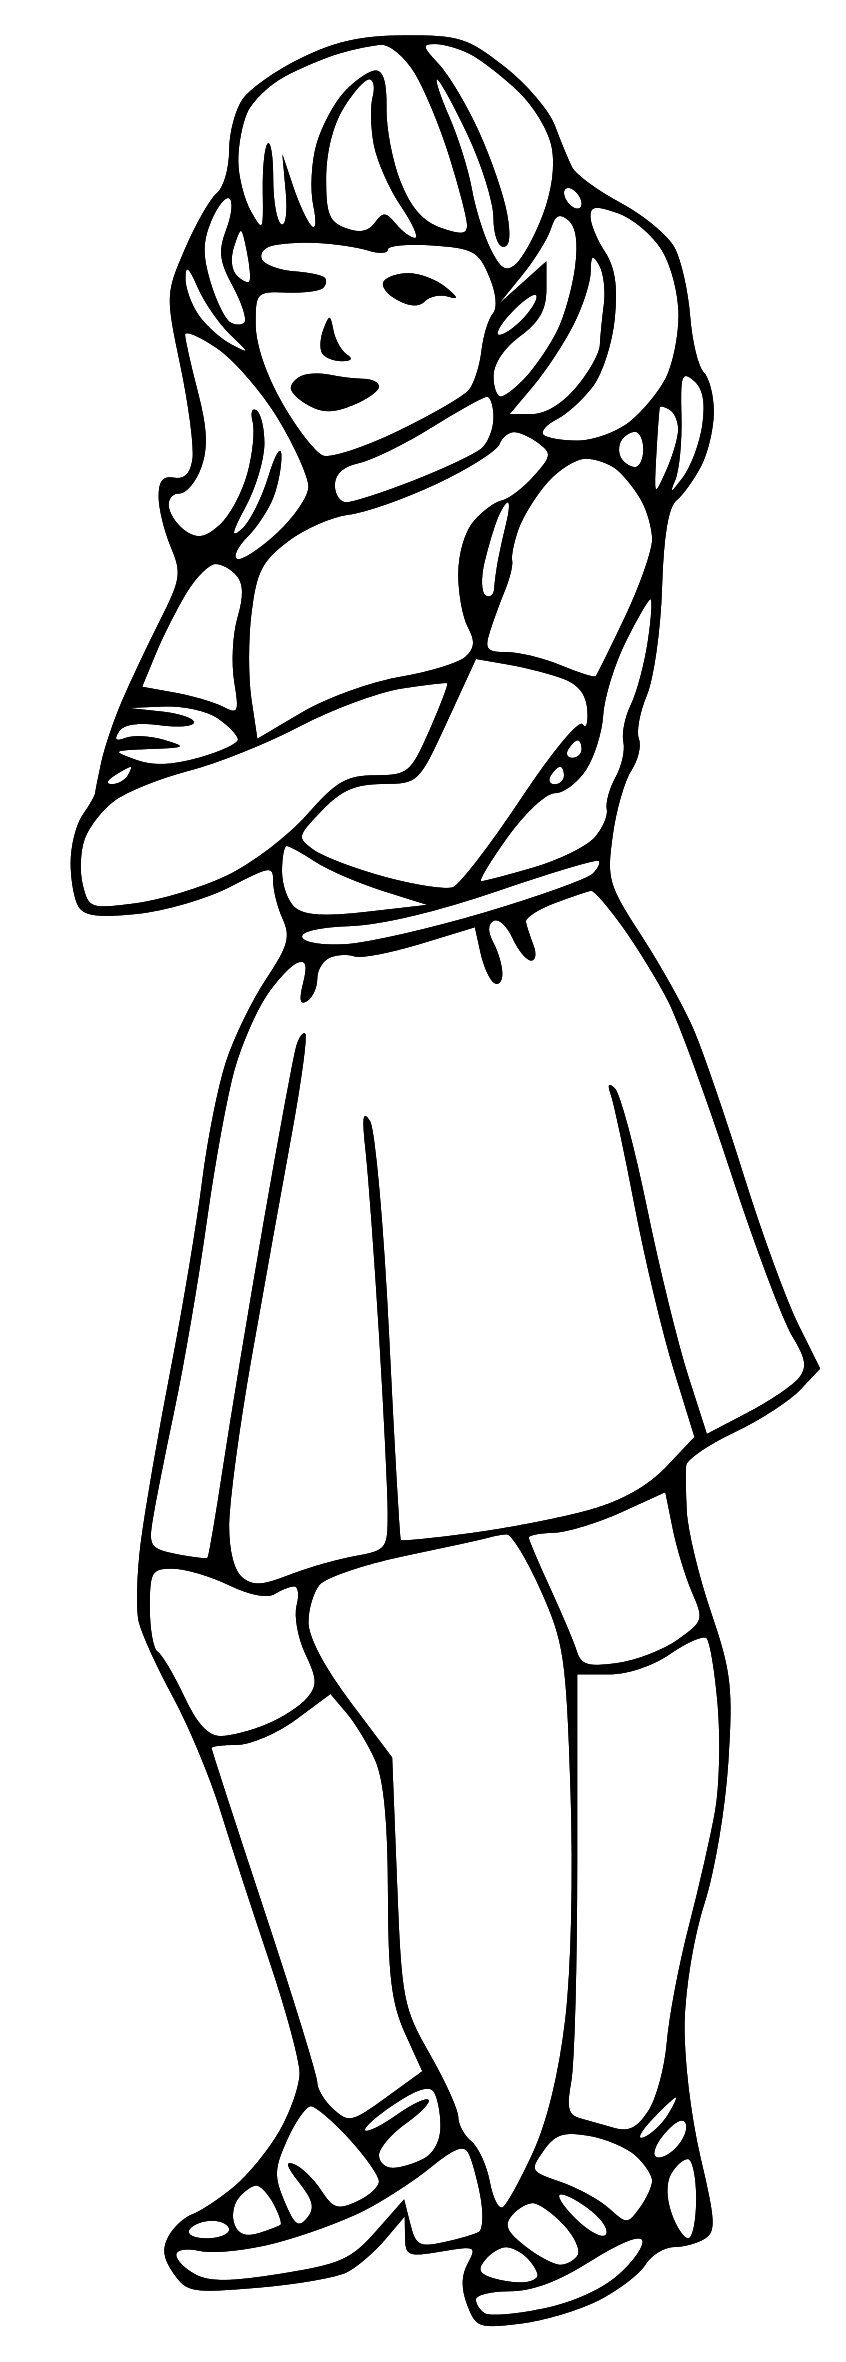 Girl Black And White Clipart | Free download on ClipArtMag